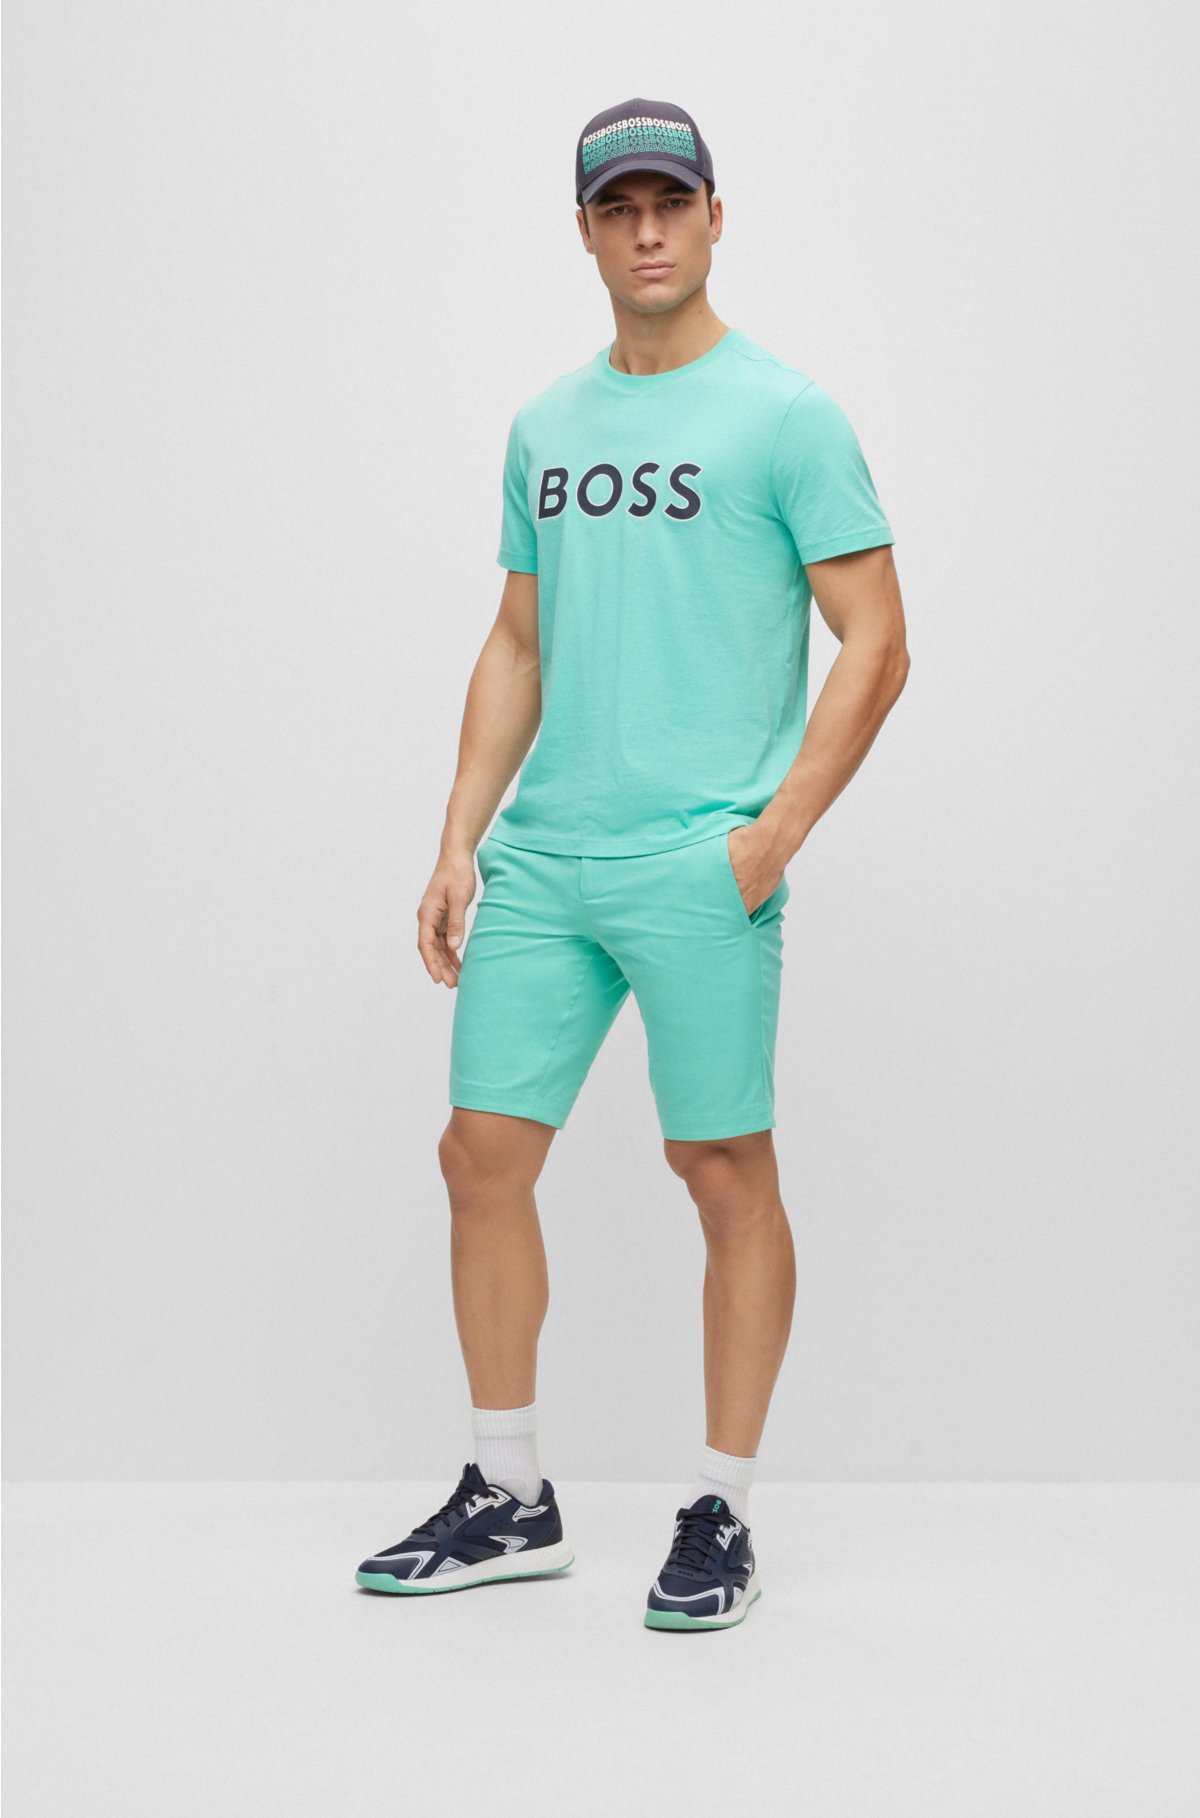 print jersey T-shirt cotton BOSS Crew-neck in logo with -